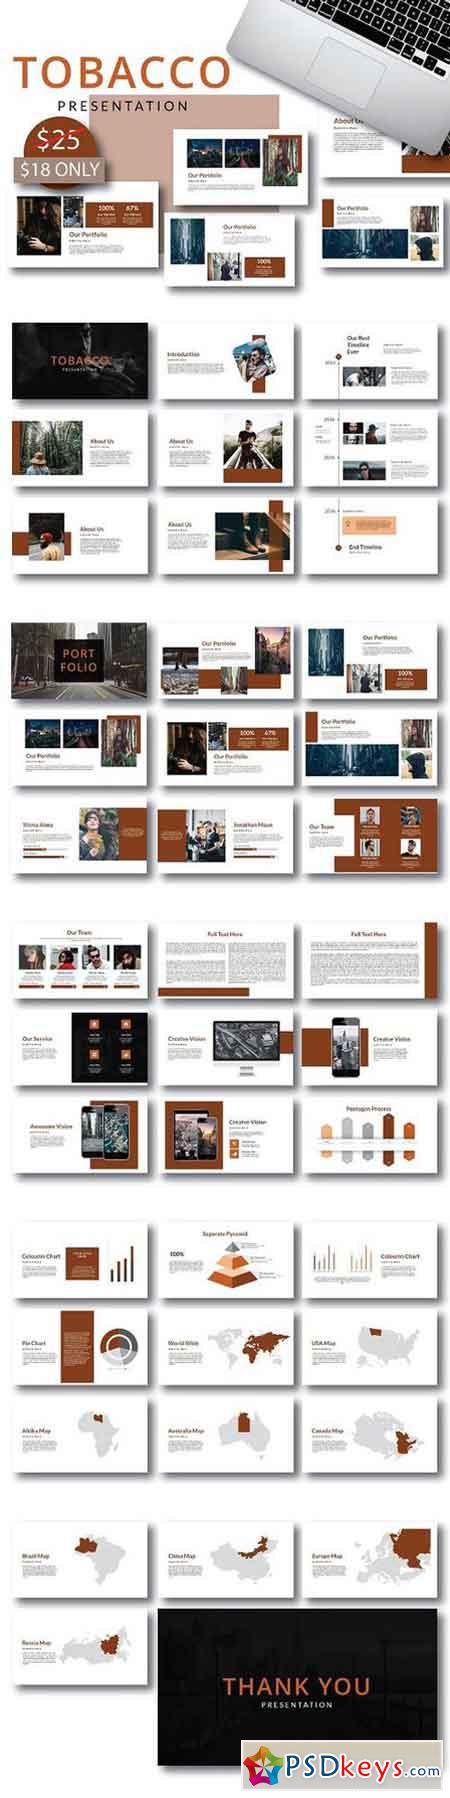 Tobacco Powerpoint Template 1743617